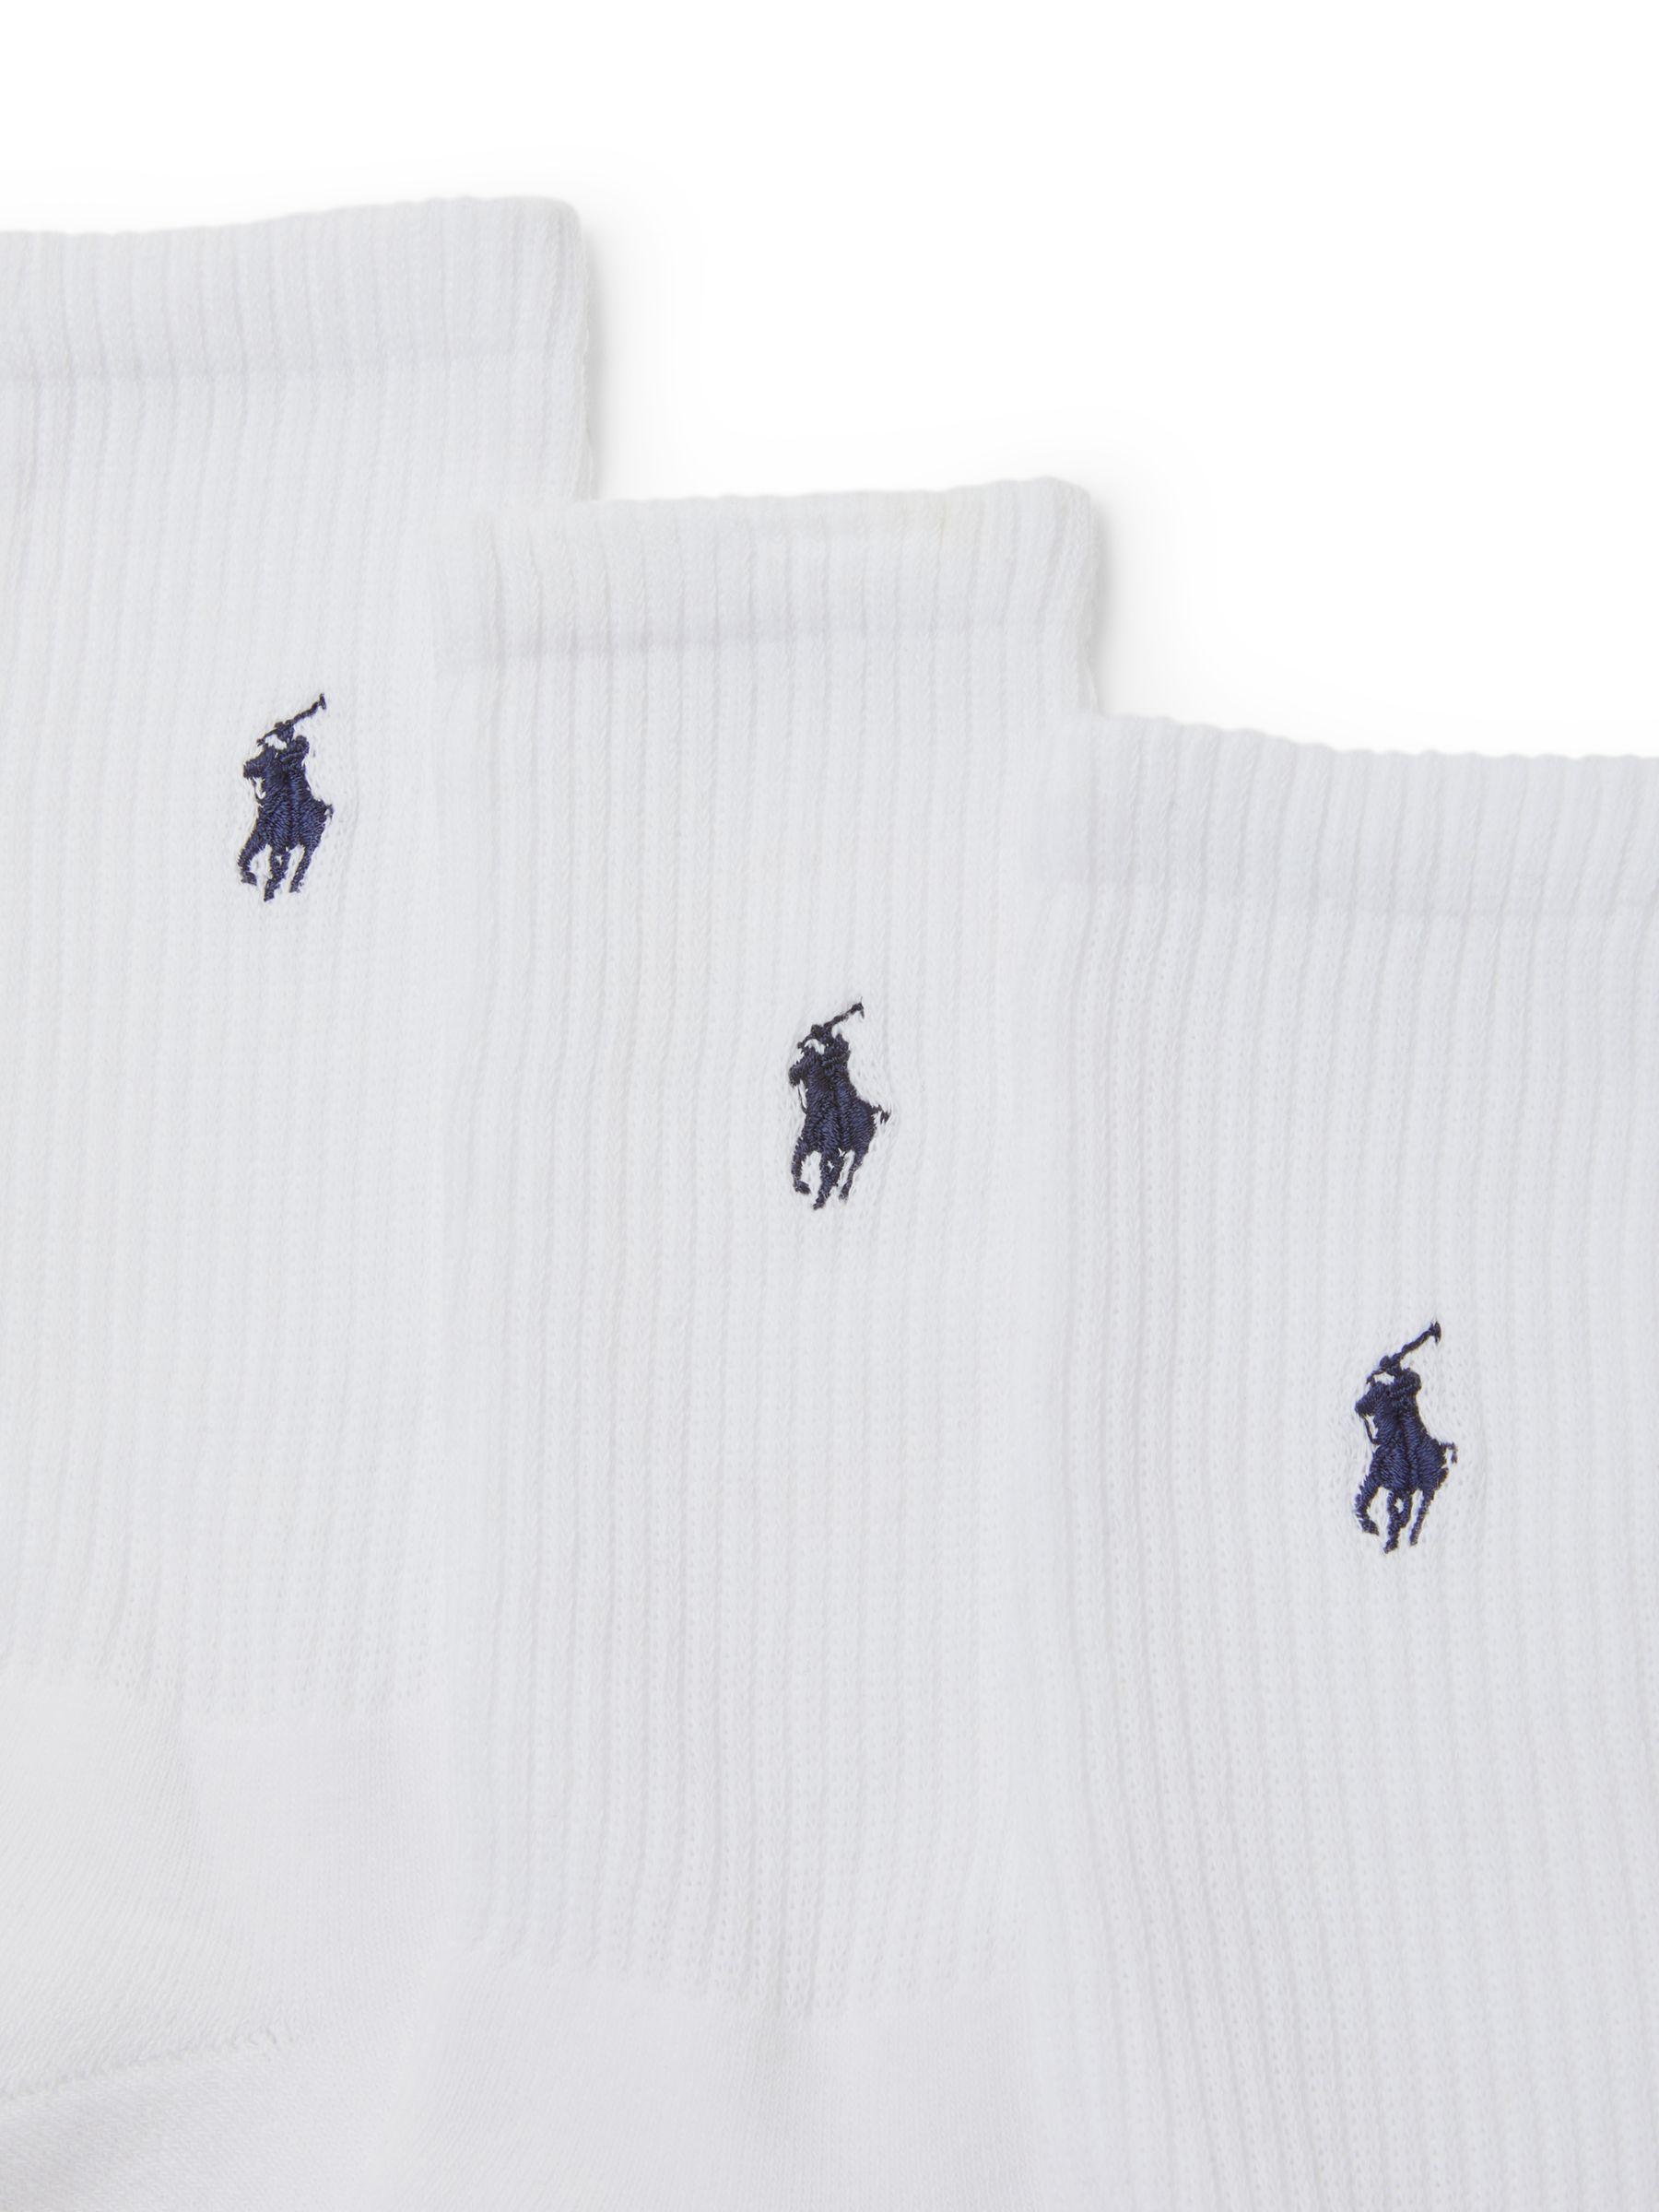 Polo Ralph Lauren Sports Socks, Pack of 3, One Size, White